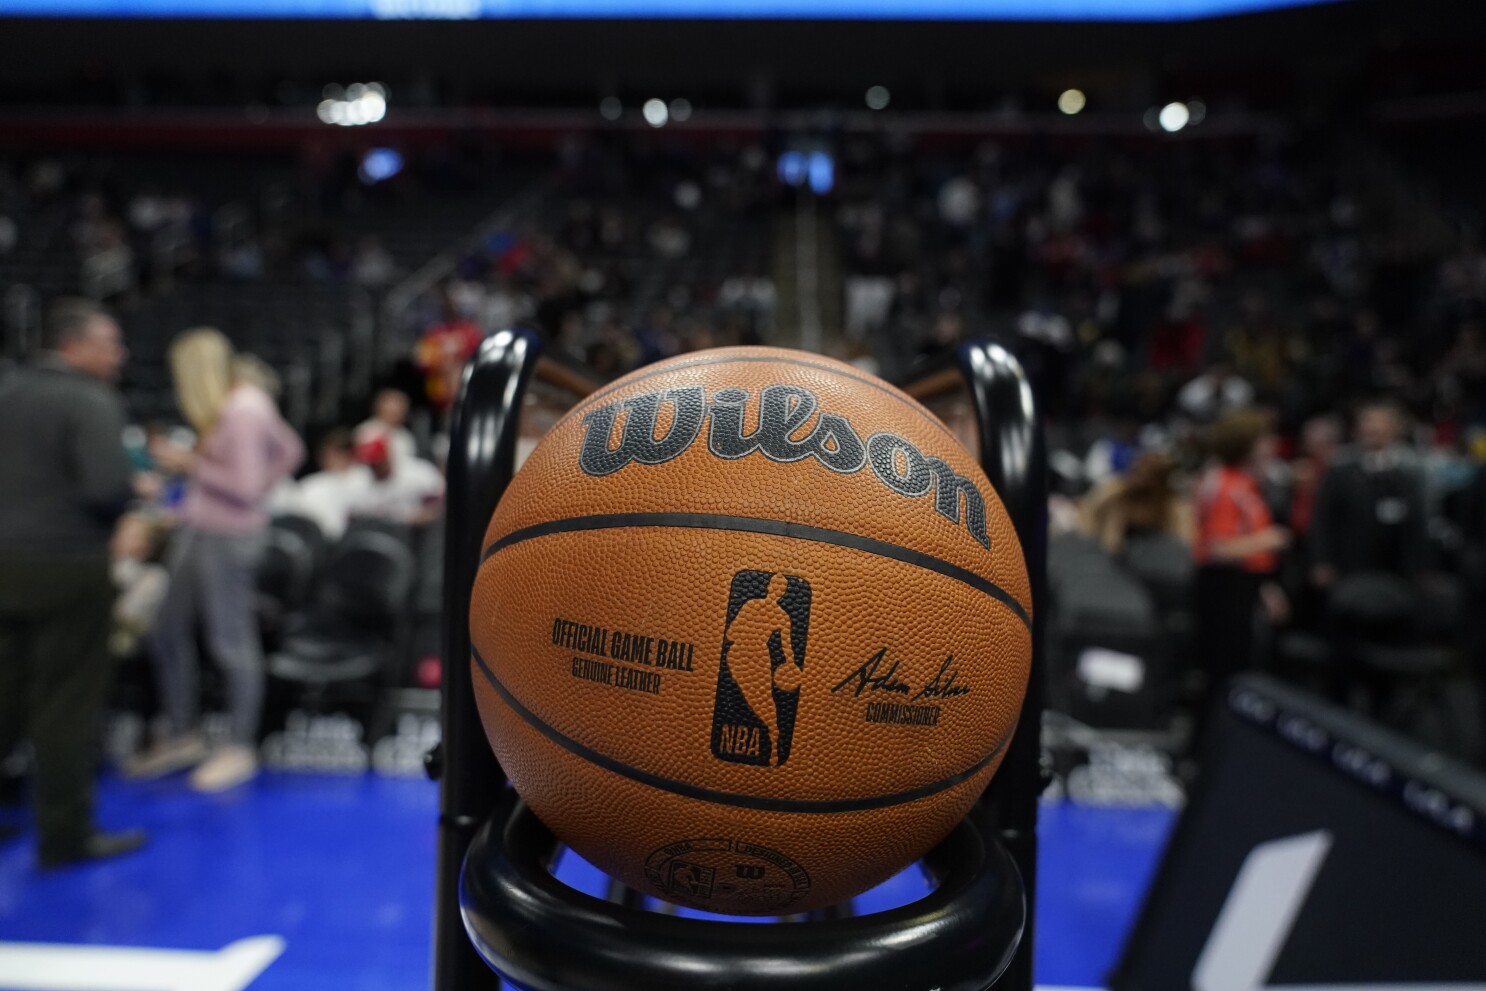 NBA Names Wilson As Official Ball; Spalding Is Not Happy - Team Insight